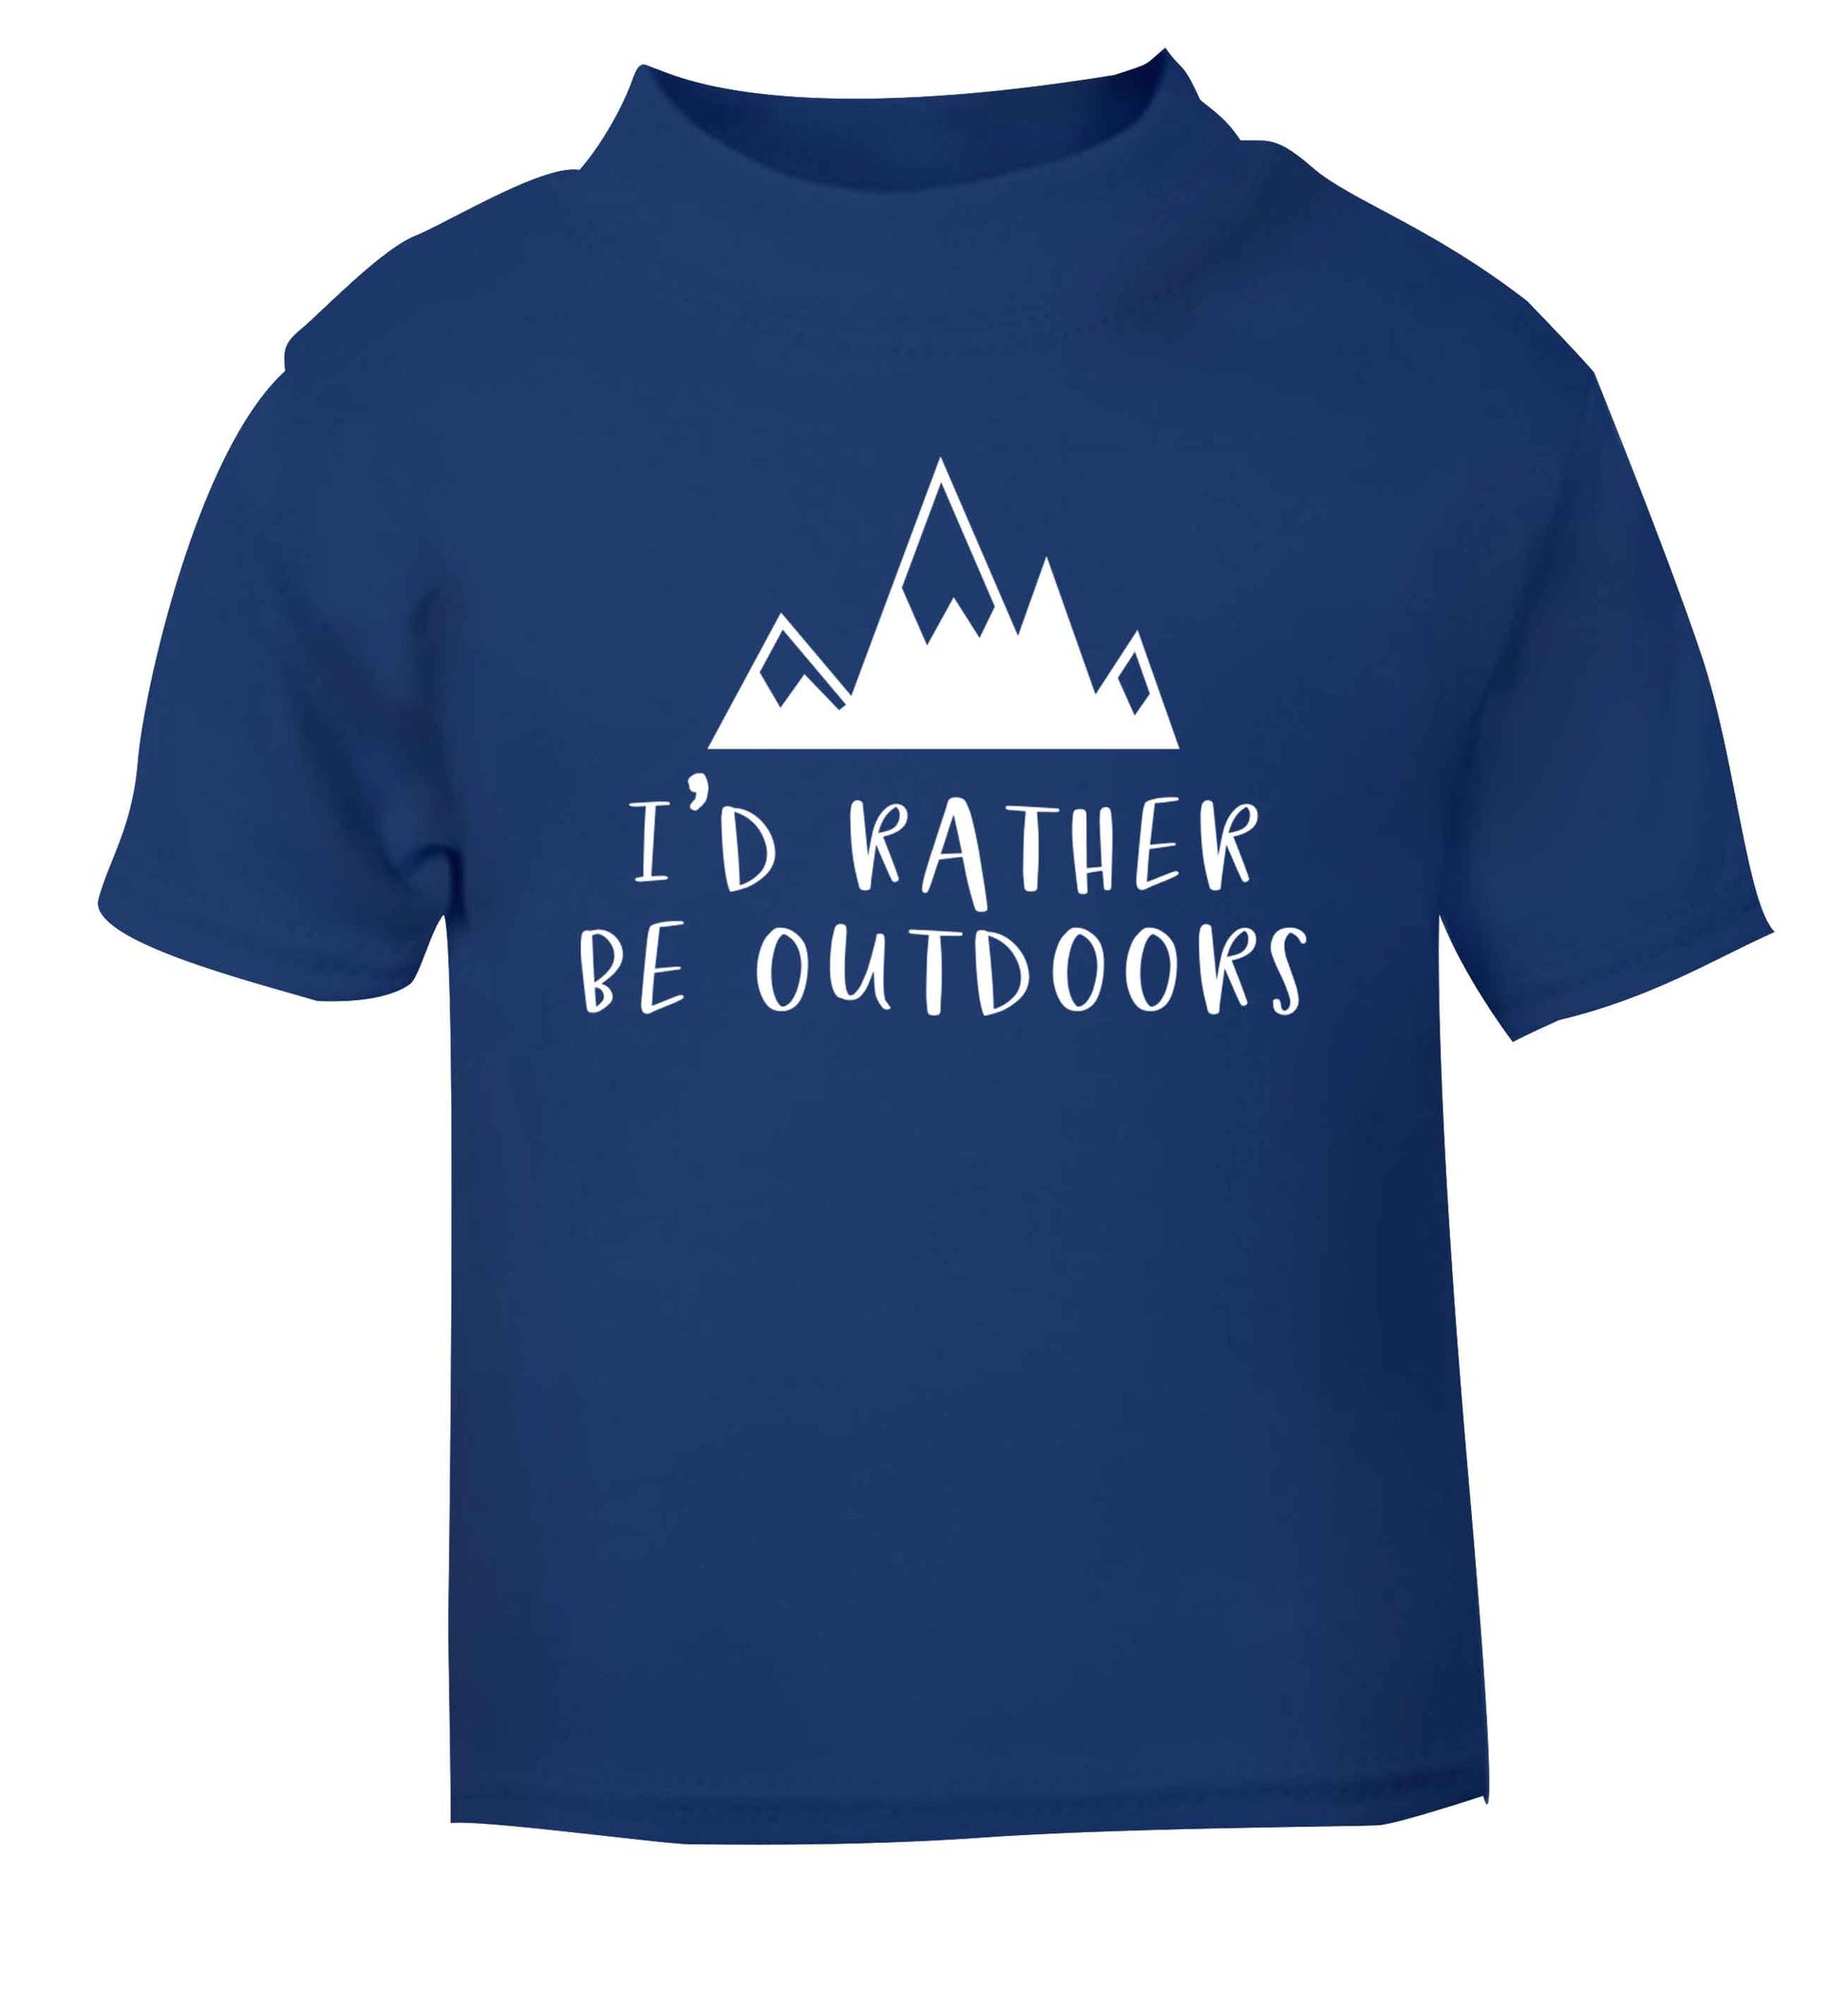 I'd rather be outdoors blue Baby Toddler Tshirt 2 Years